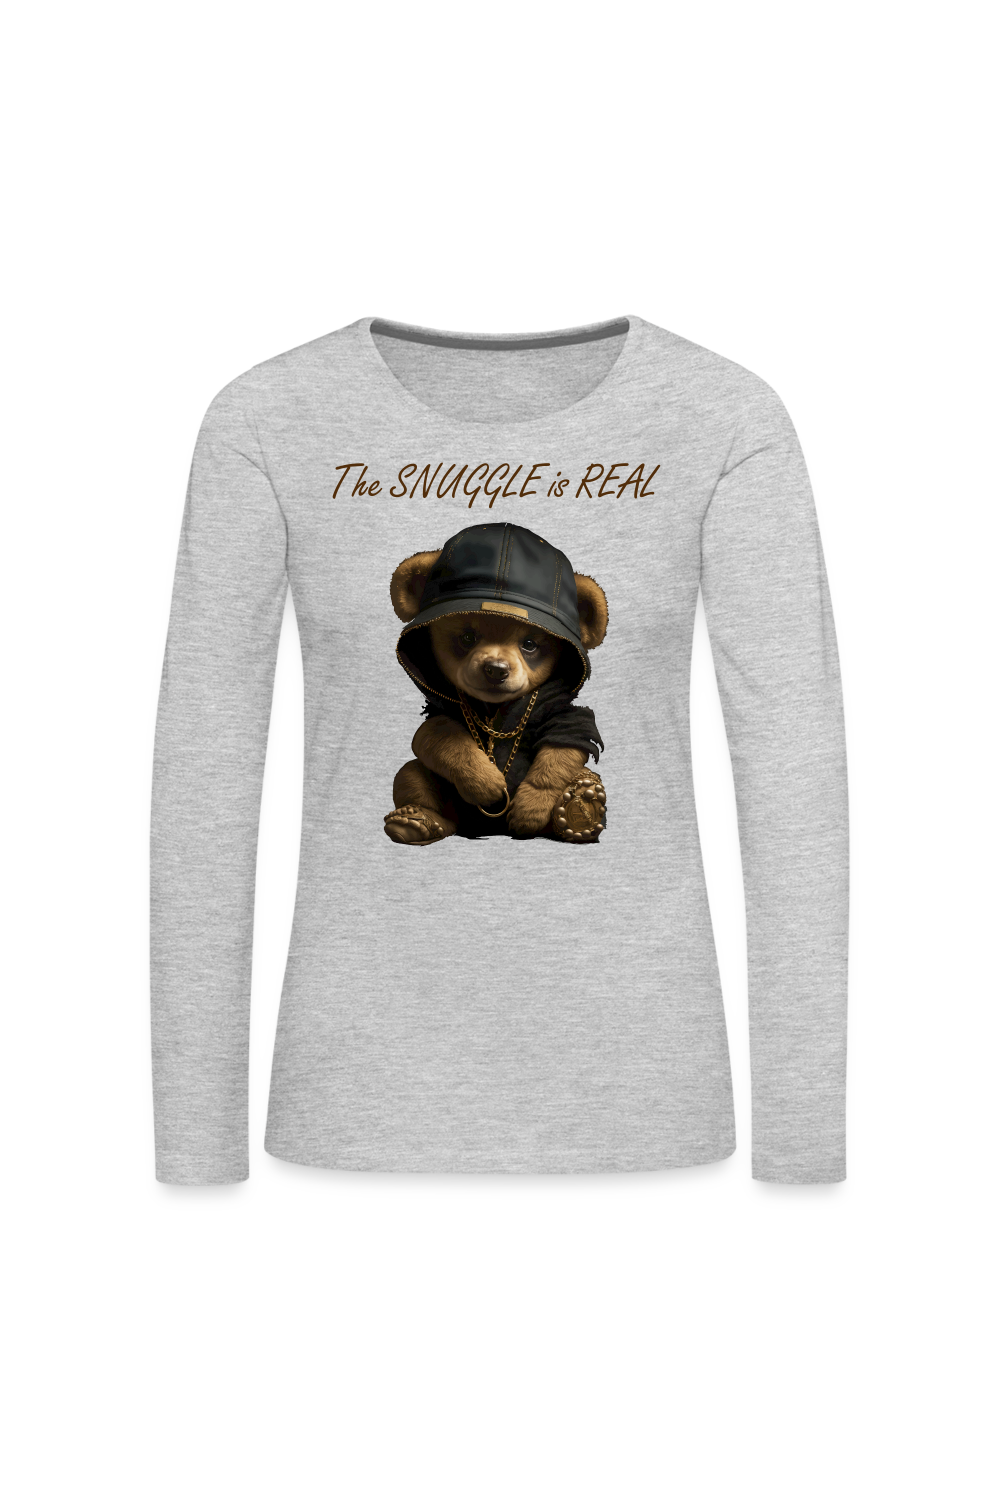 Women's The Snuggle is Real Long Sleeve T-Shirt - heather gray